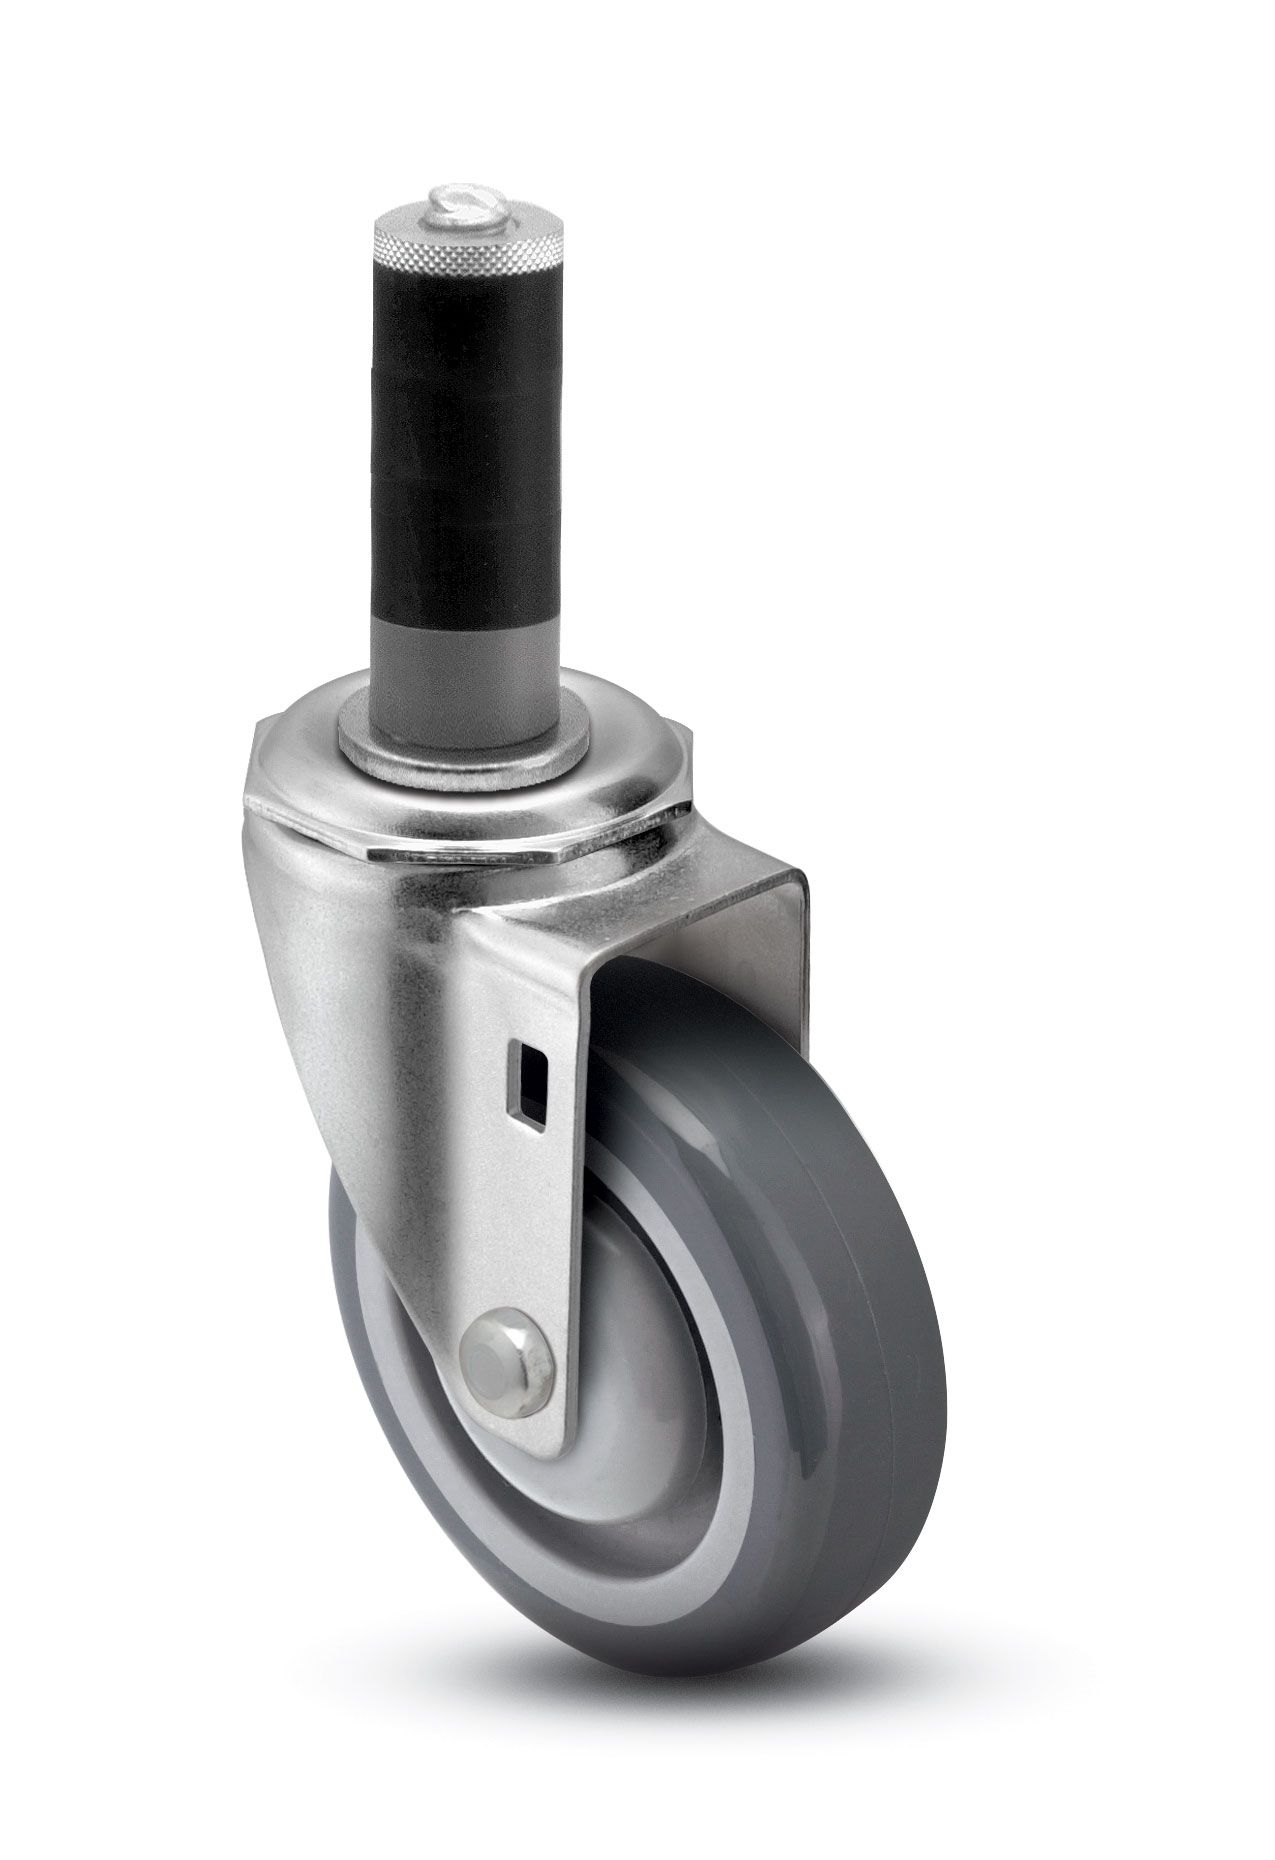 Caster; Swivel; 5" x 1-1/4"; TPR Rubber; Expandable Adapter (1-1/2" - 1-9/16" ID tubing); Zinc; Precision Ball Brng; 300#; Total Lock; Dust Cover (Item #65055)